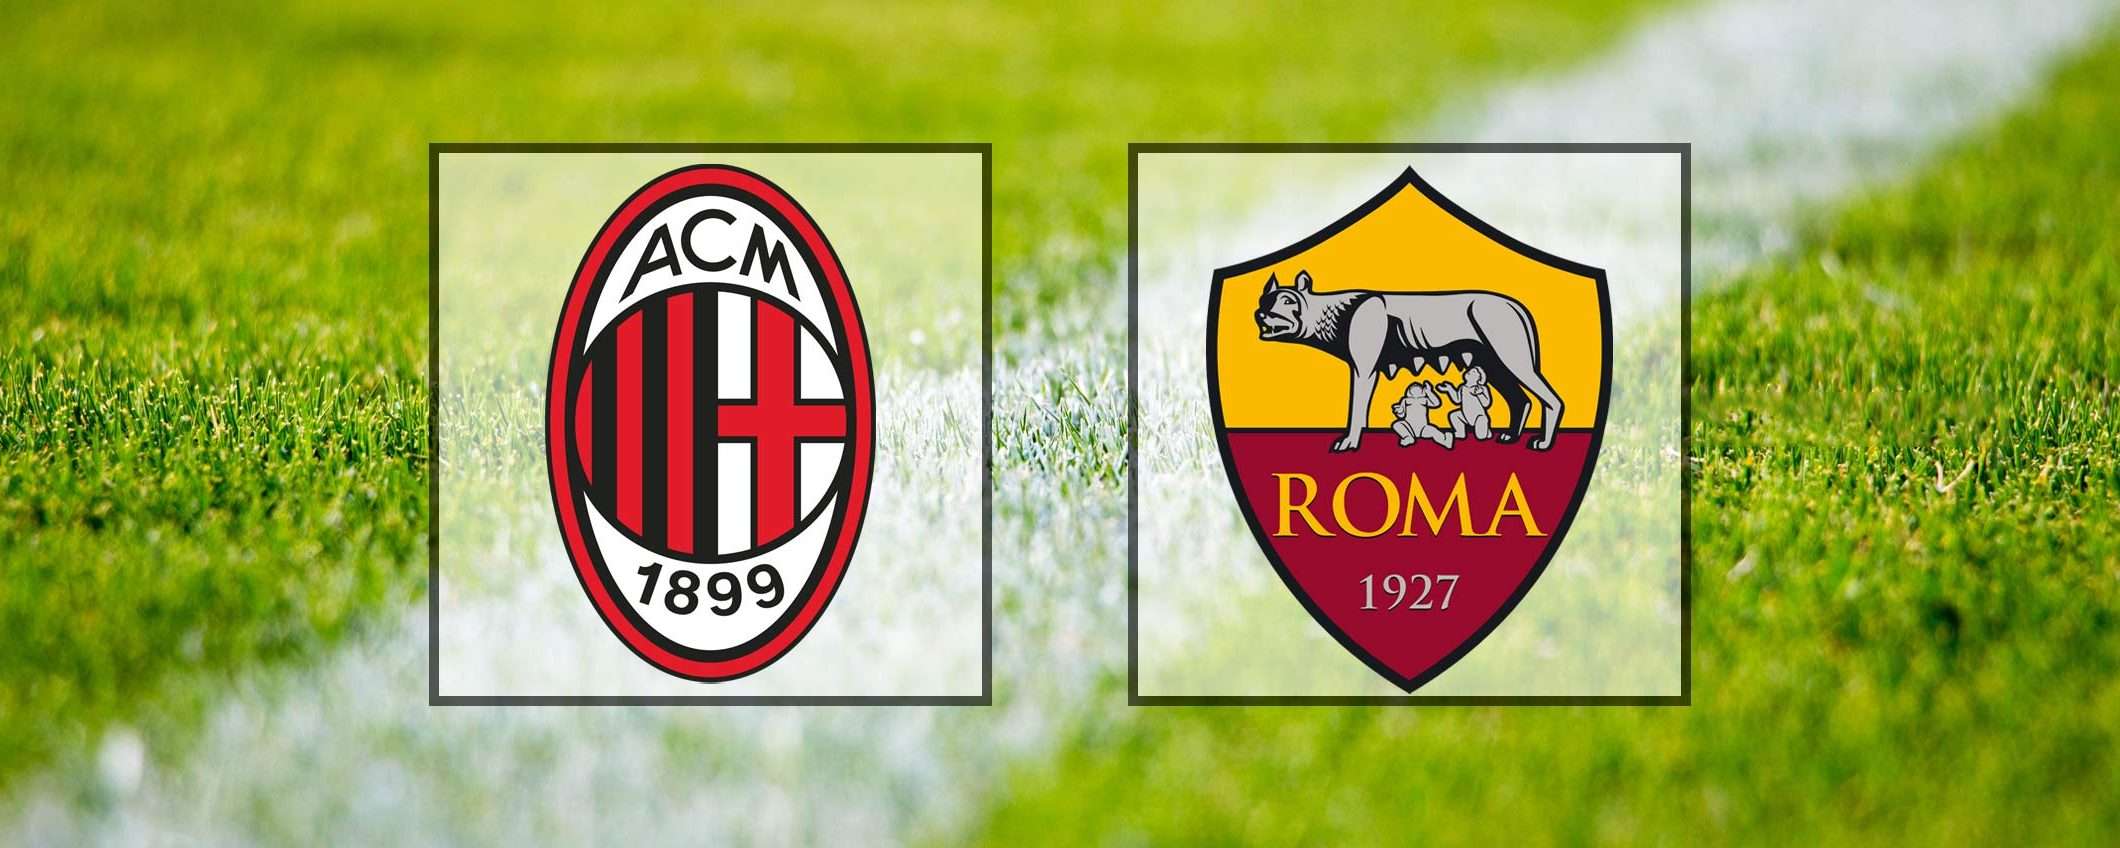 Come vedere Milan-Roma in streaming